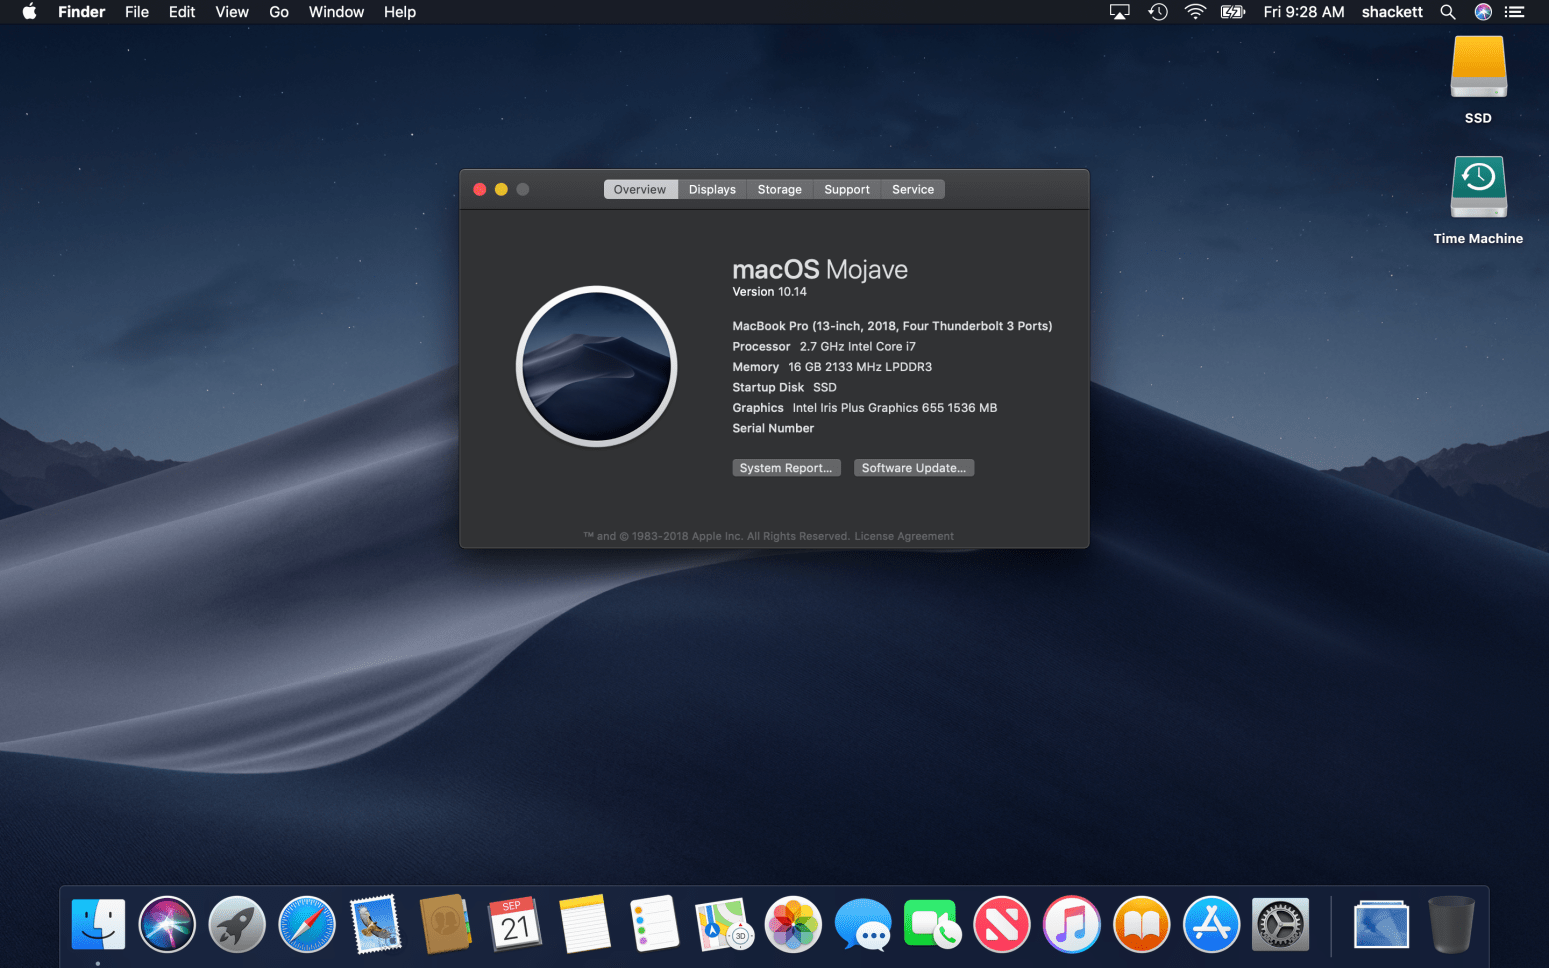 macOS 10.14 Mojave About Dialog (2018)